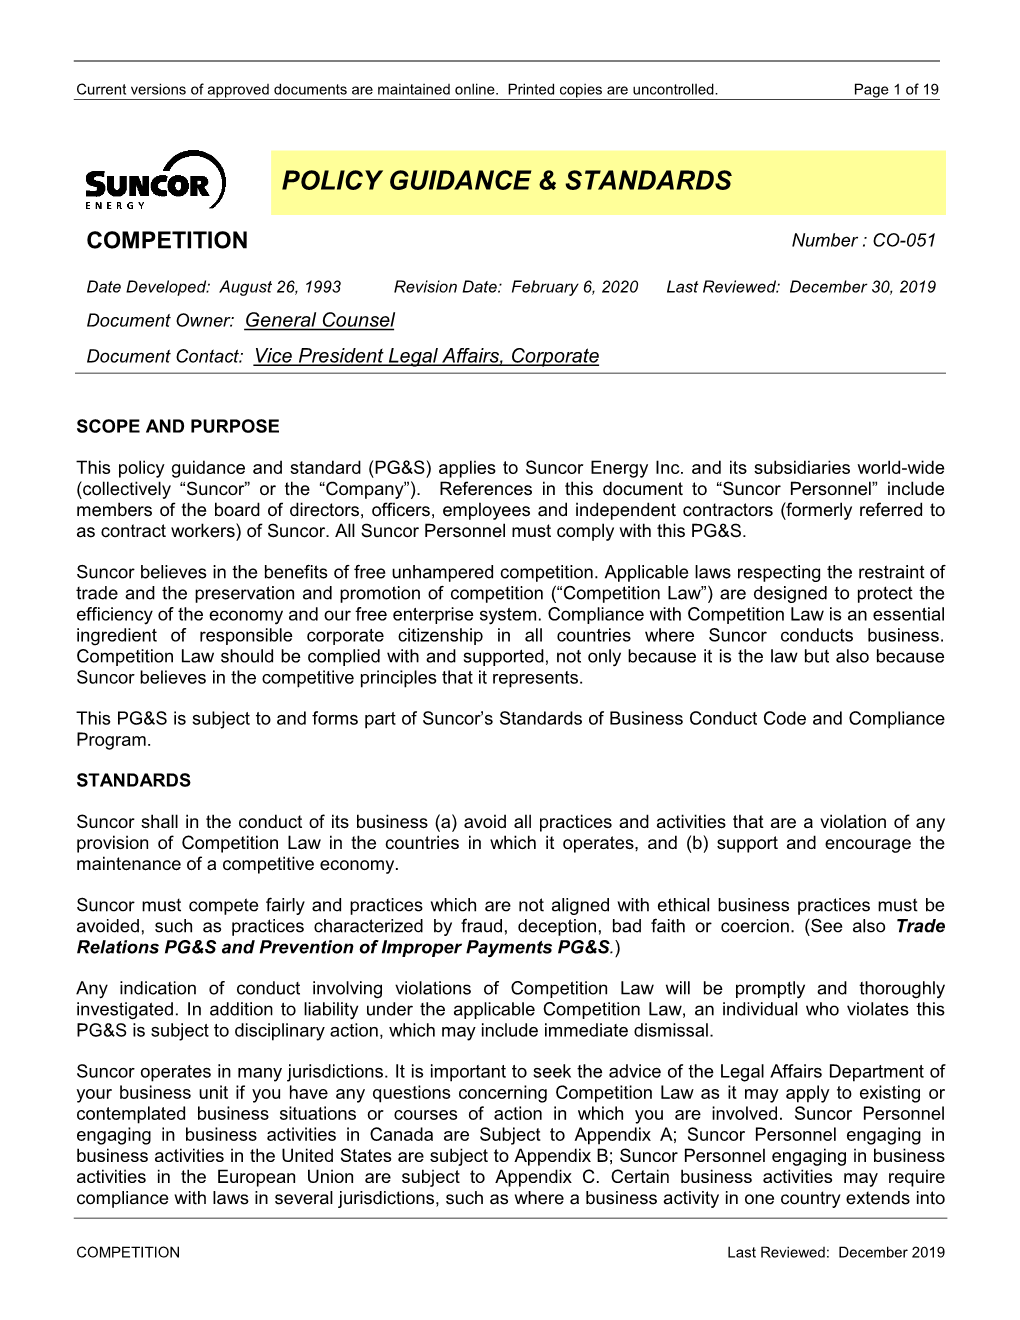 Policy Guidance & Standards